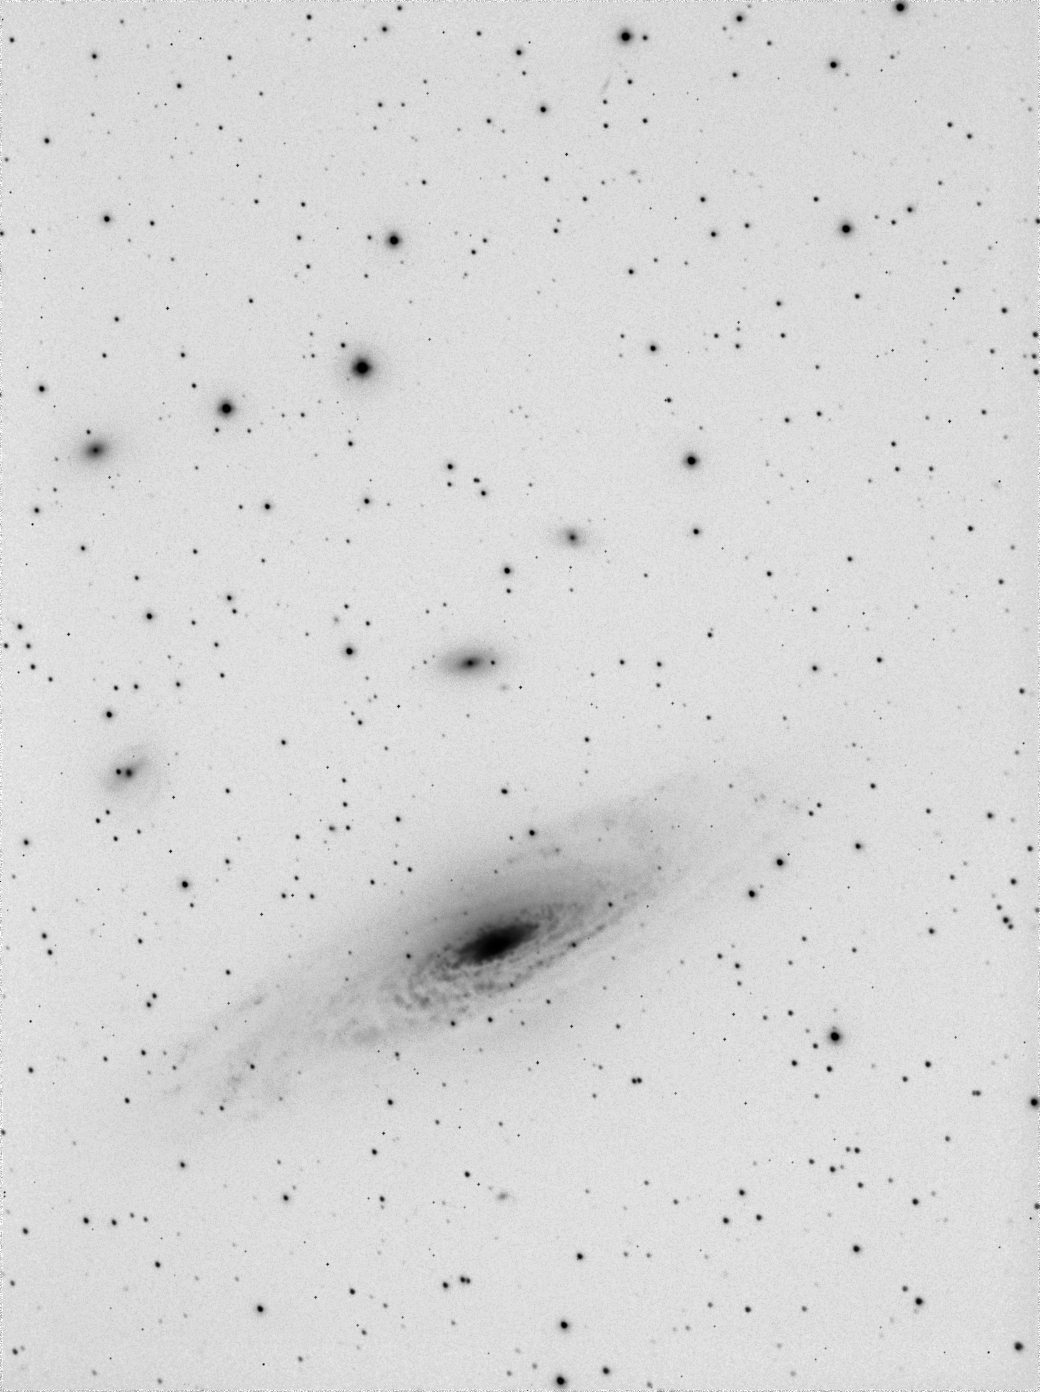 NGC 7331 inverted